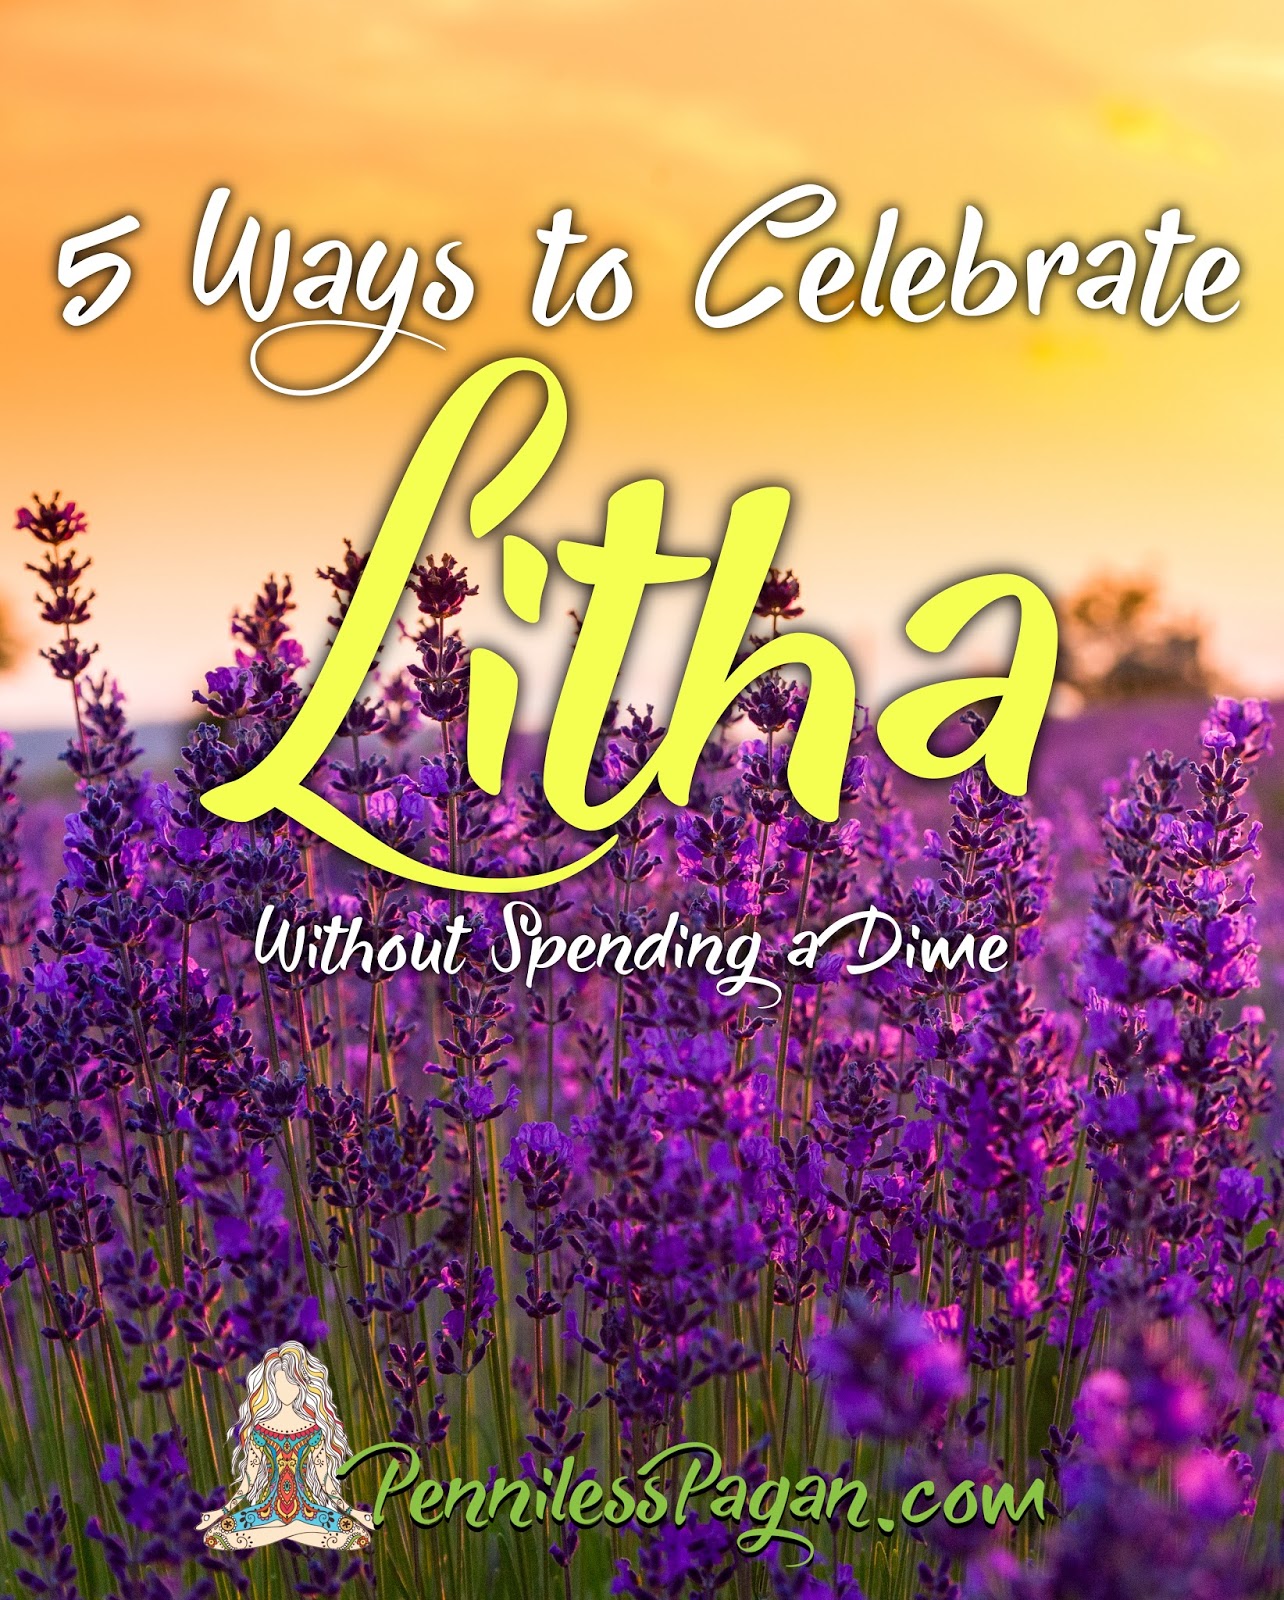 Penniless Pagan: 5 (More) Ways to Celebrate Litha Without Spending a Dime